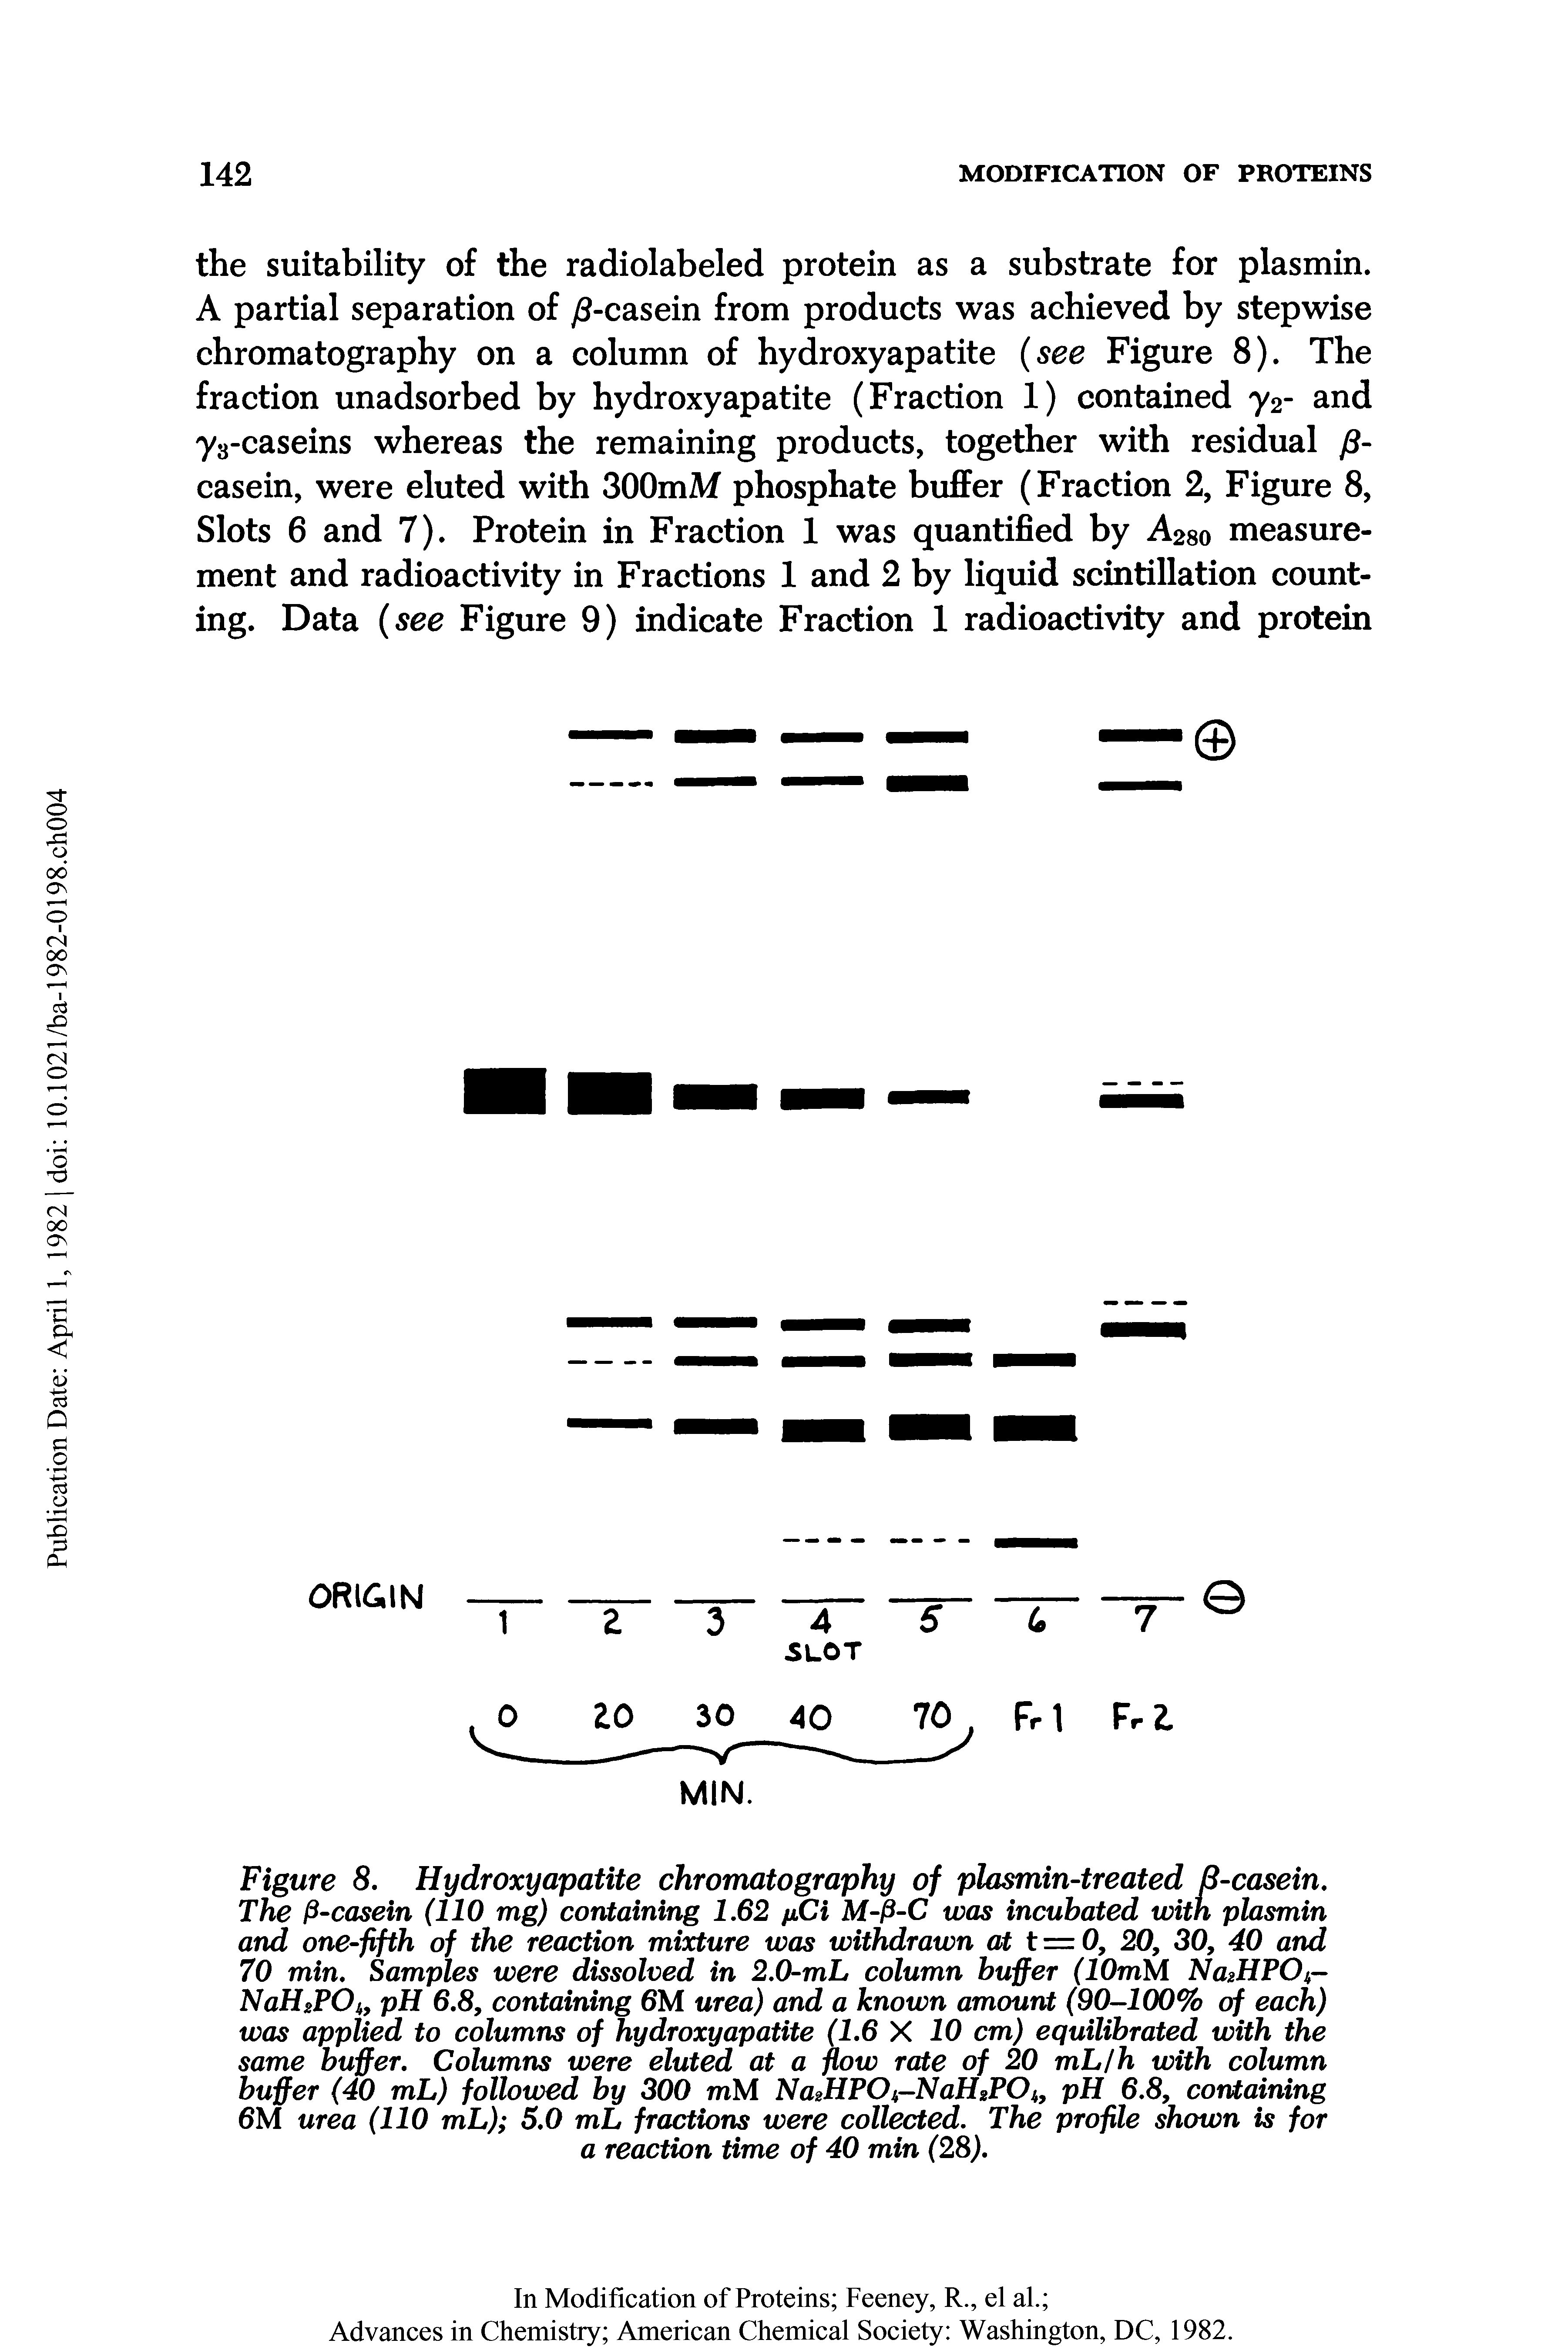 Figure 8. Hydroxyapatite chromatography of plasmin-treated 6-casein. The P-casein (110 mg) containing 1.62 fiCi M-P-C was incubated with plasmin and one-fifth of the reaction mixture was withdrawn at t — 0, 20, 30, 40 and 70 min. Samples were dissolved in 2.0-mL column buffer (lOmM Na2HPOi-NaHsPOi, pH 6.8, containing 6M urea) and a known amount (90-100% of each) was applied to columns of hydroxyapatite (1.6 X 10 cm) equilibrated with the same buffer. Columns were eluted at a flow rate of 20 mL/h with column buffer (40 mL) followed by 300 mM Na HPOi,-NaH2POi pH 6.8, containing 6M urea (110 mL) 5.0 mL fractions were collected. The profile shown is for a reaction time of 40 min (28).